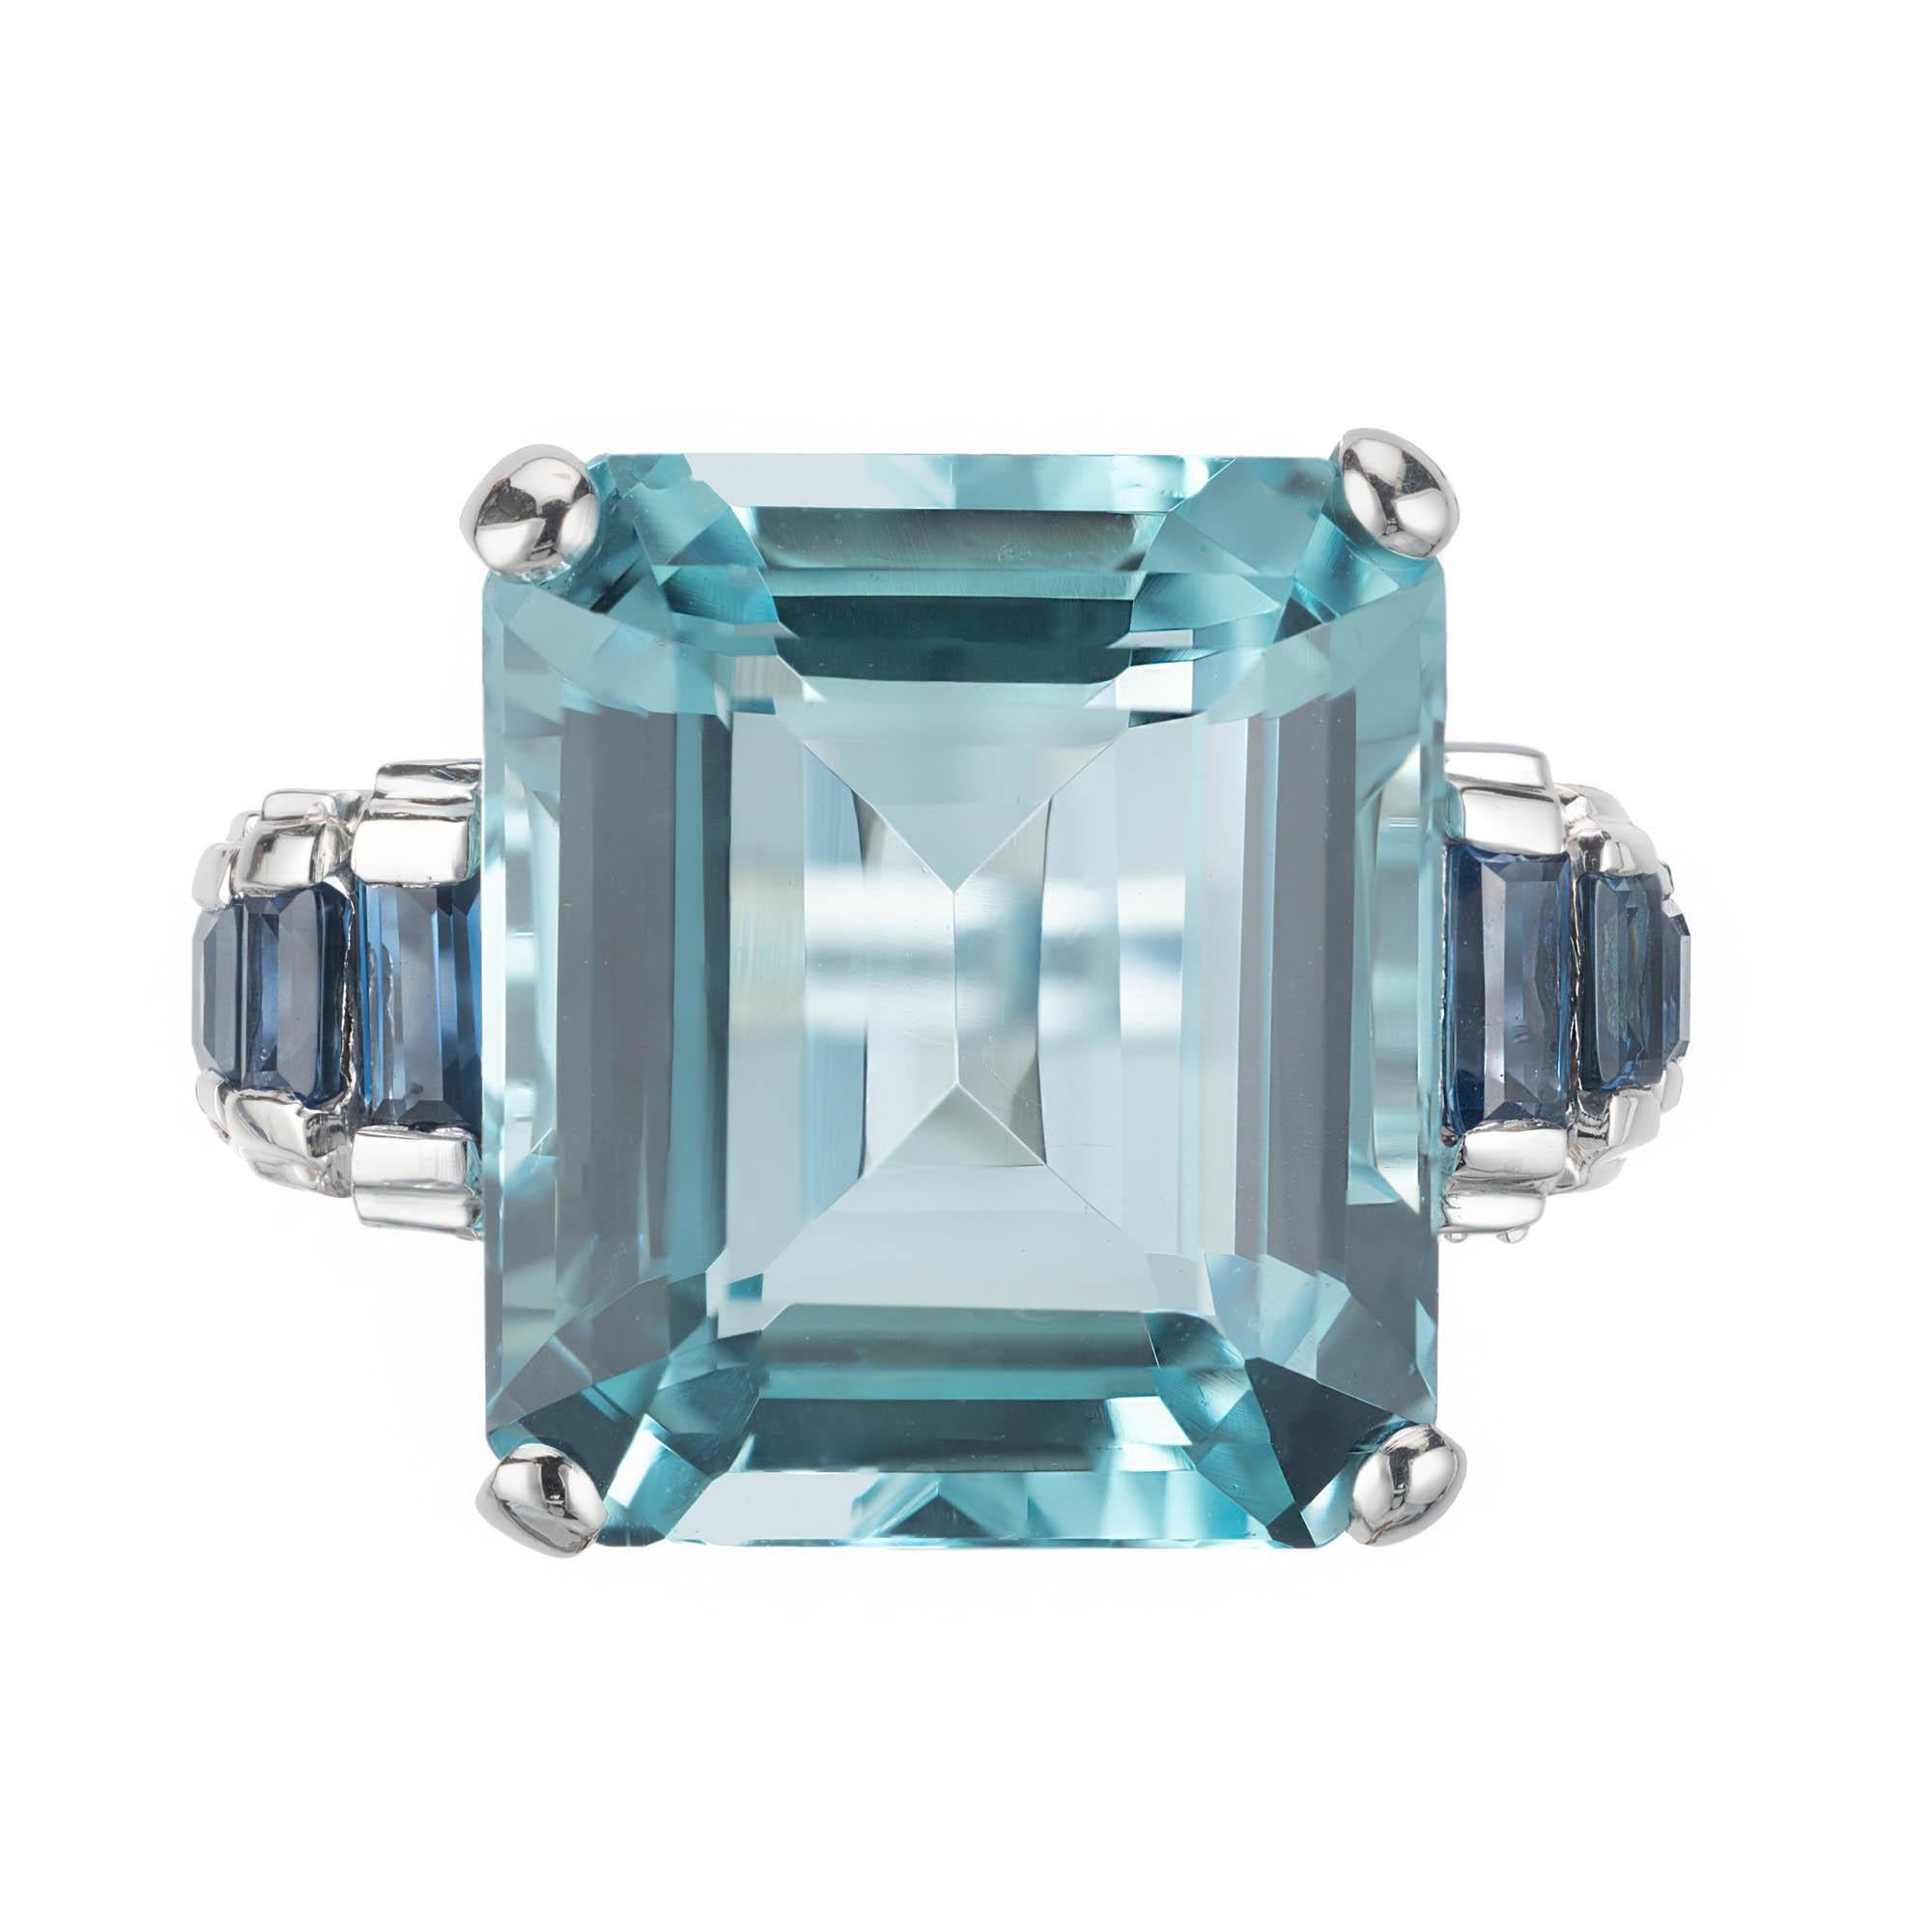 Vintage 1940s aquamarine and sapphire cocktail ring. 17.88 center aqua sits in a 18k white gold setting with six accent sapphires. 

1 square step cut blue VS aquamarine, Approximate 17.88 carats 
6 rectangular baguette blue VS sapphires,